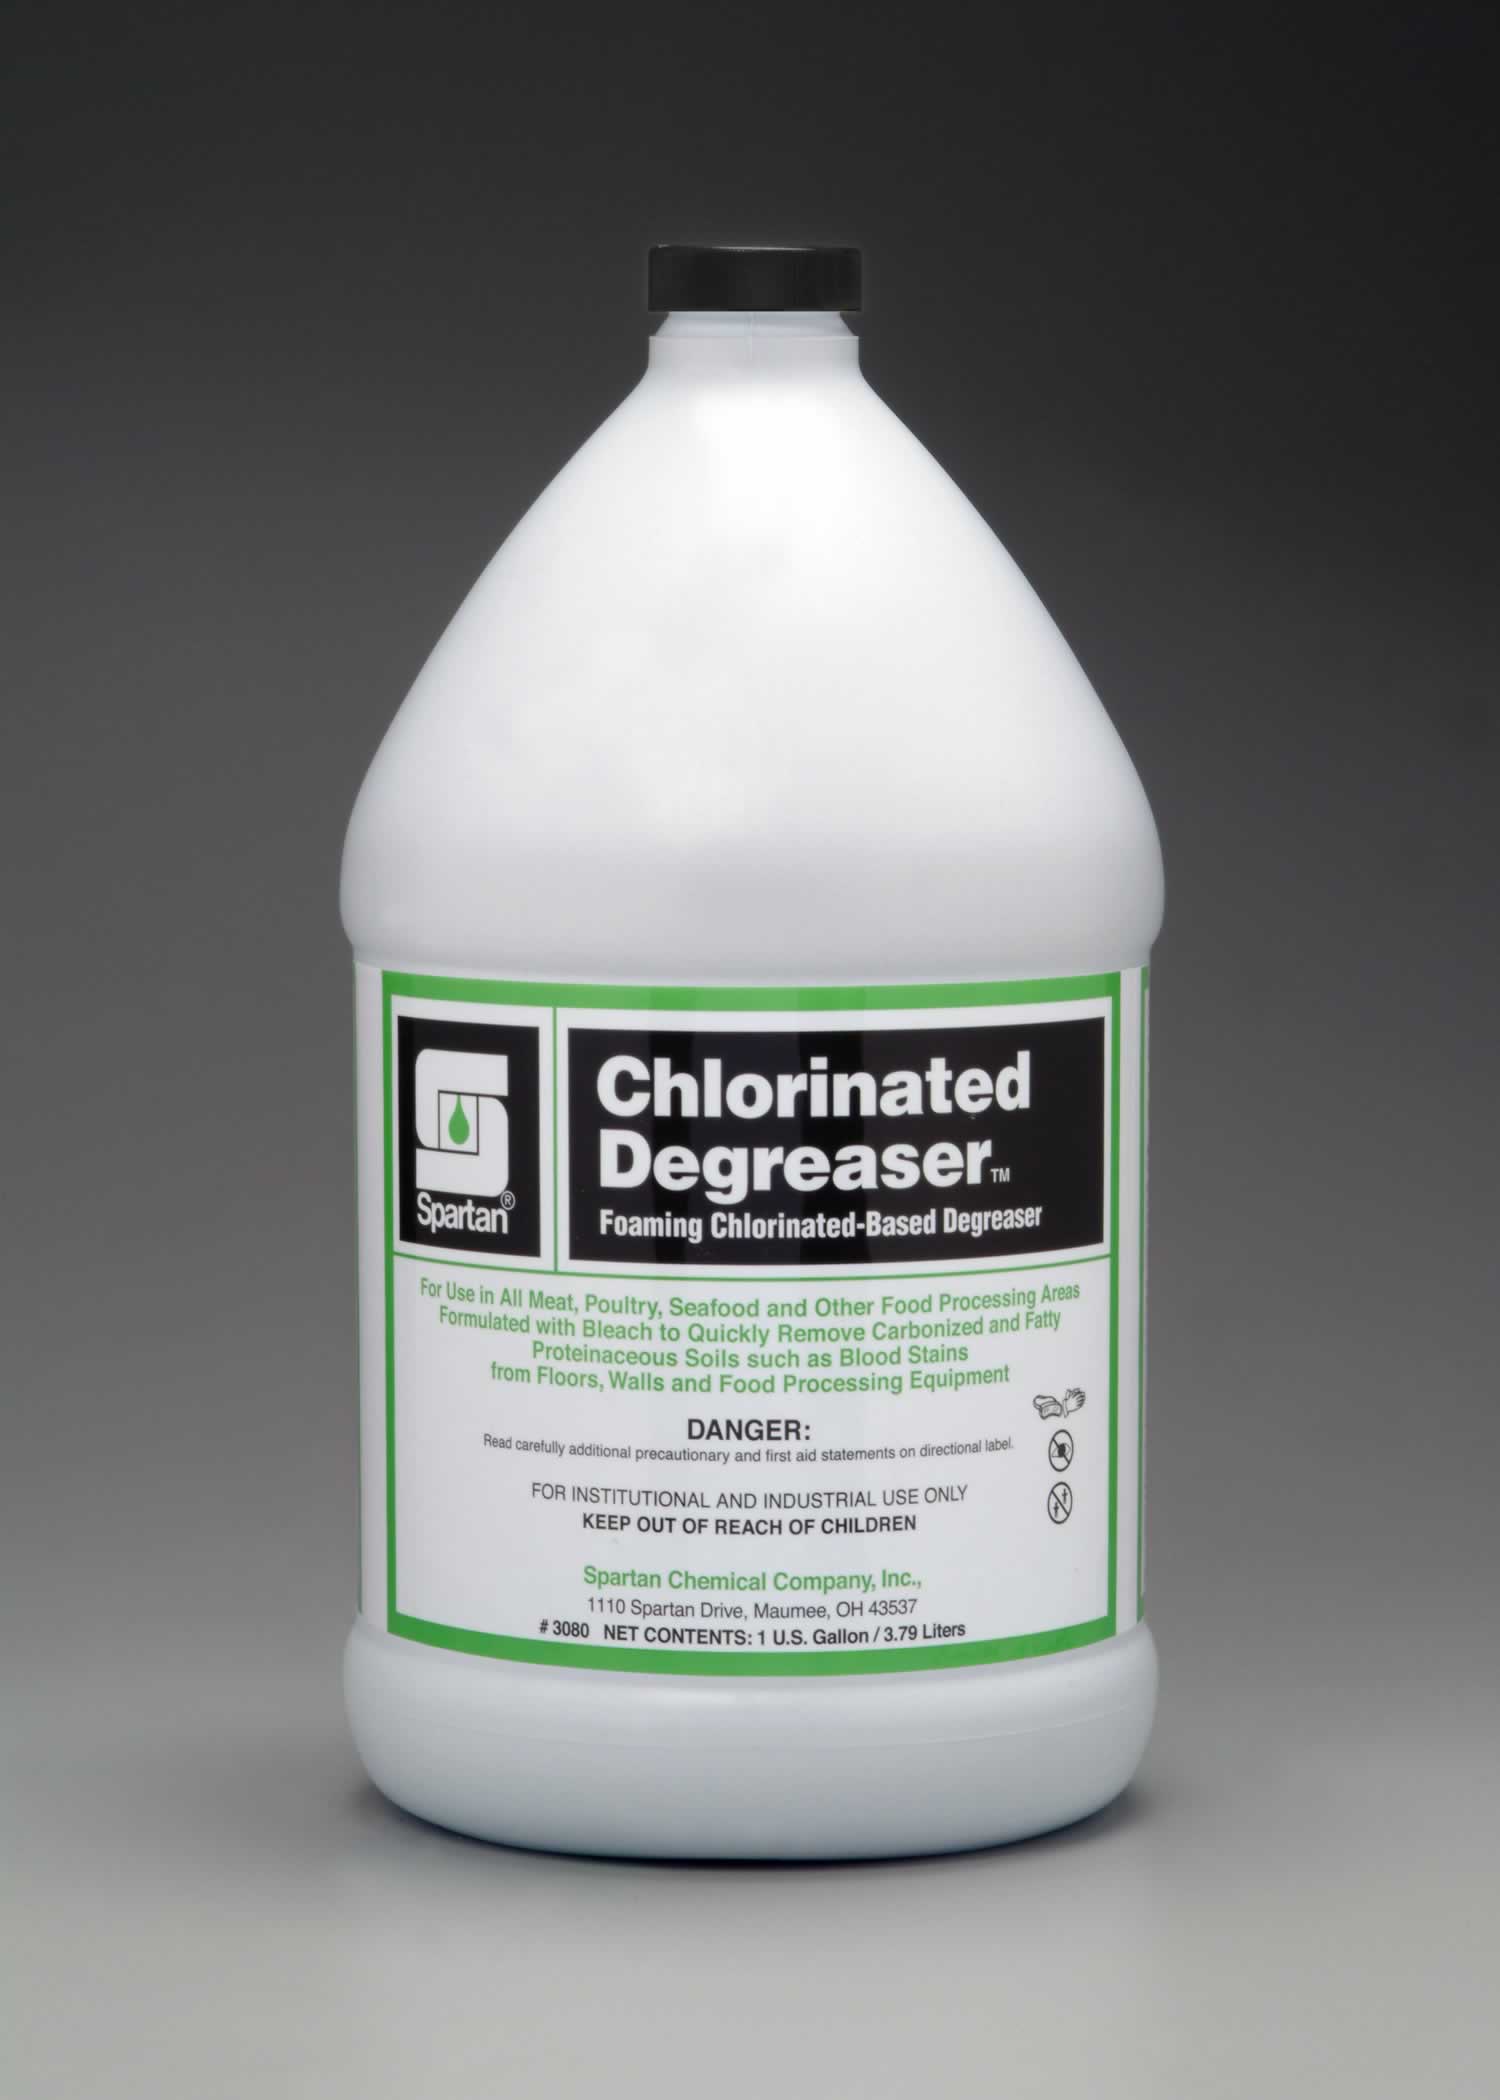 Chlorinated degreaser for use in food processing